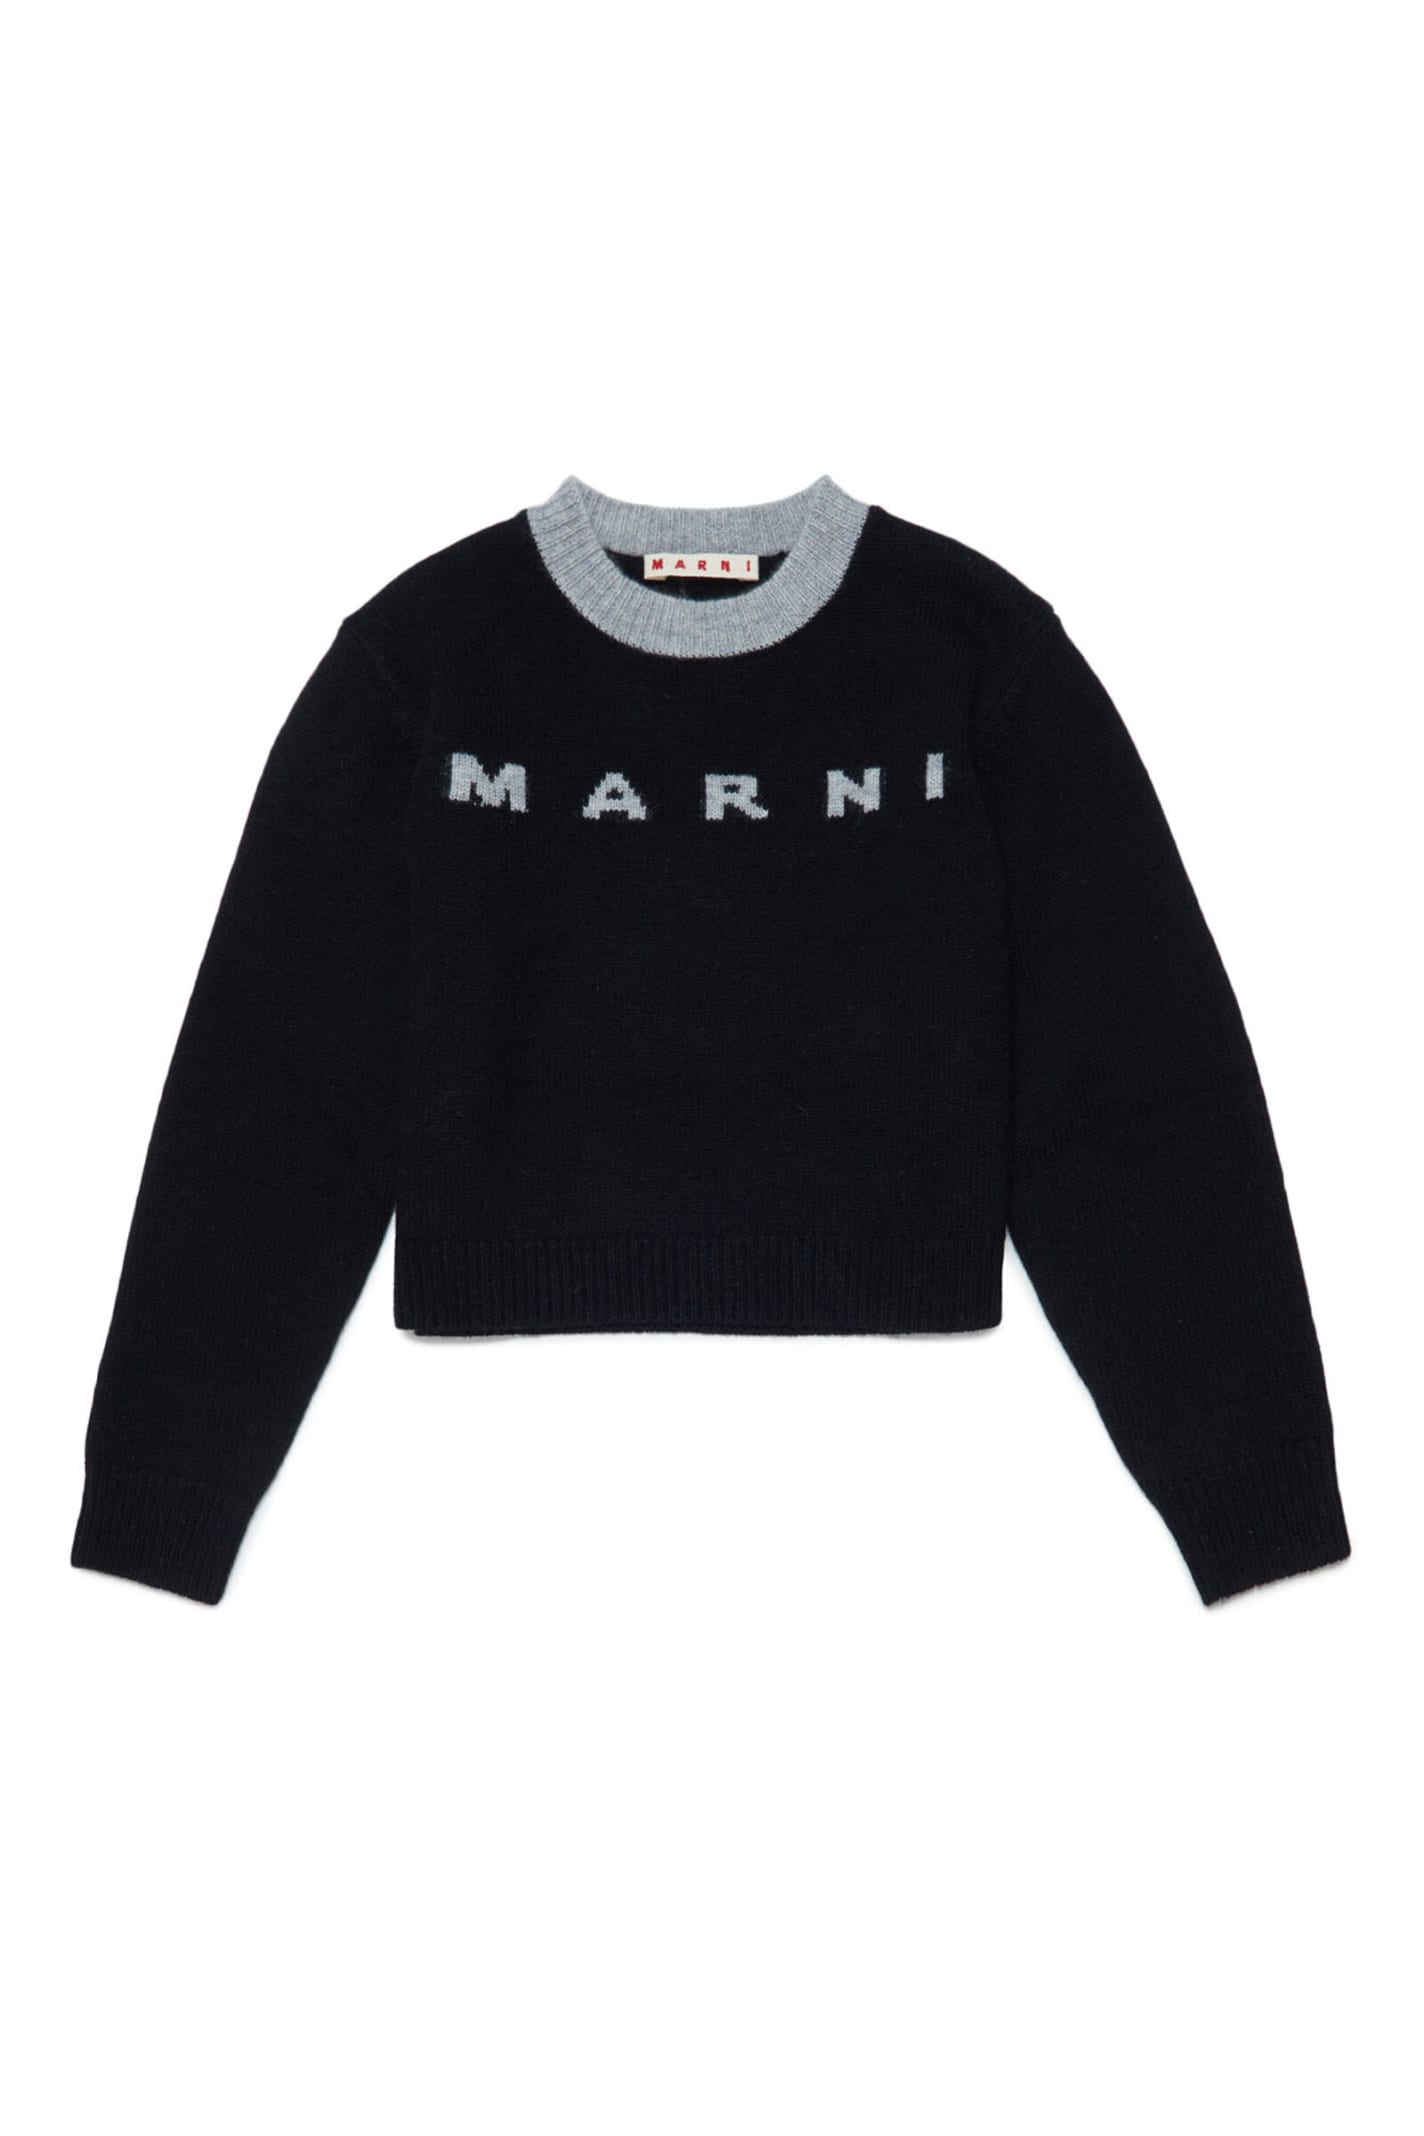 MARNI MK107F KNITWEAR MARNI BLACK SWEATER IN WOOL-CASHMERE BLEND WITH JACQUARD LOGO AND RIBBED EDGES